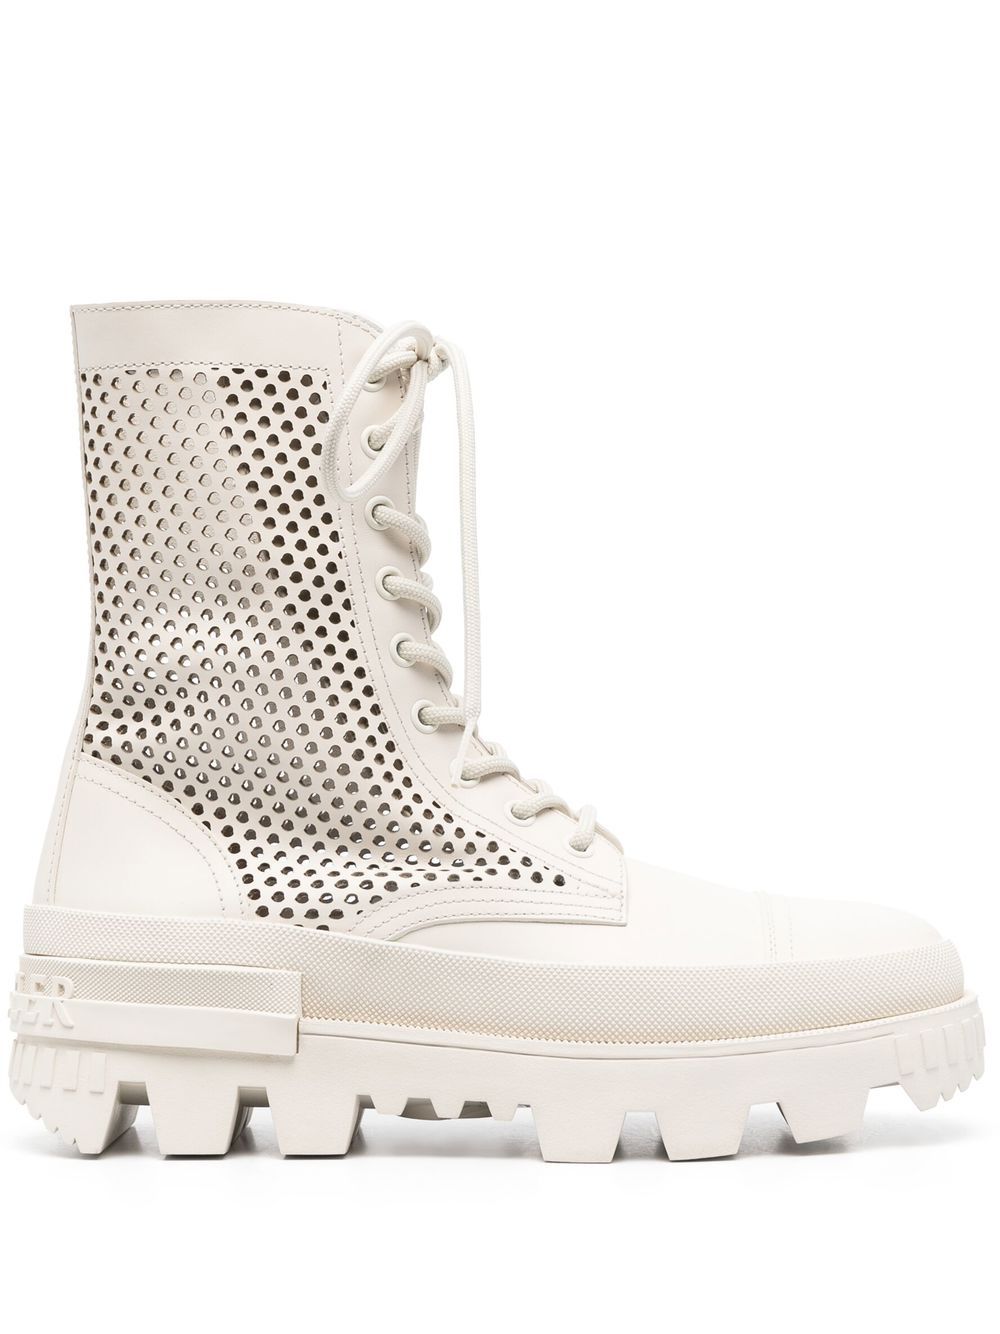 MONCLER PERFORATED LACE-UP BOOTS